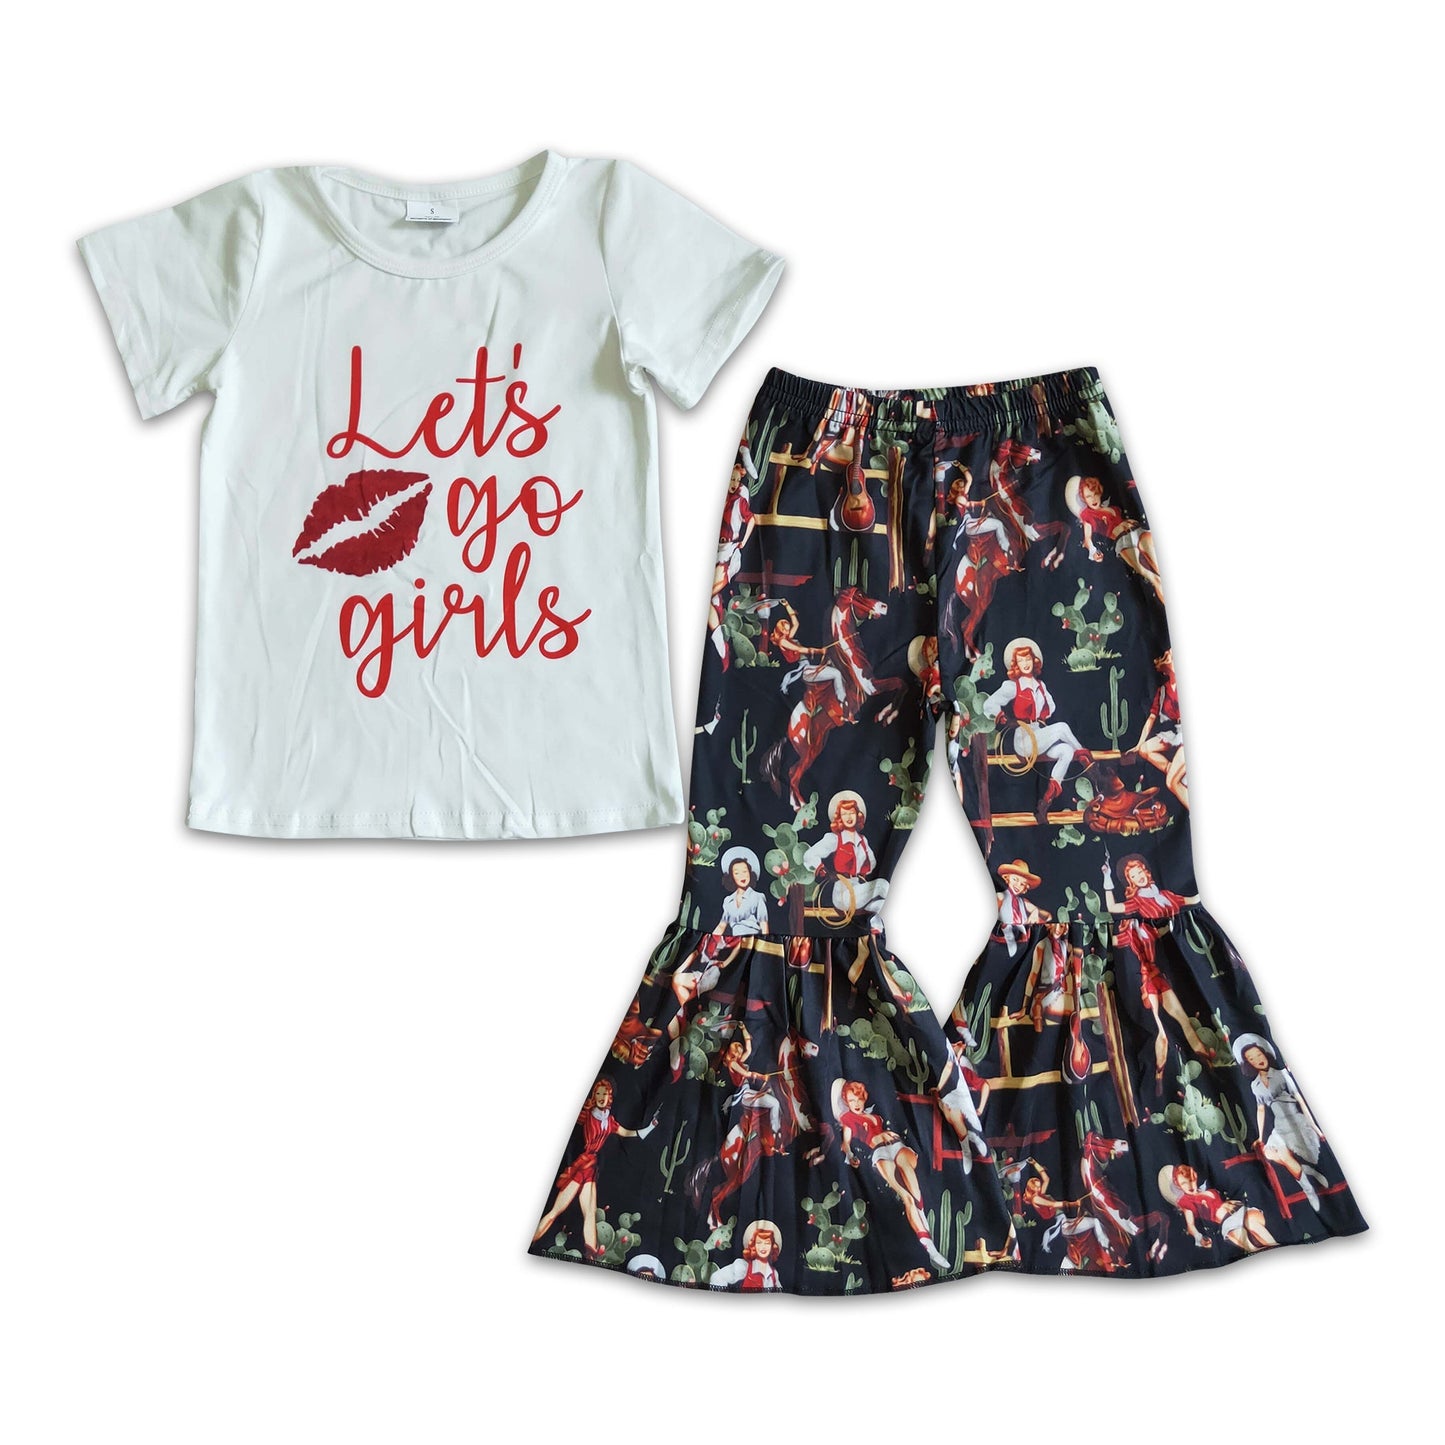 Let's Go Girls Outfit – Yawoo Garments